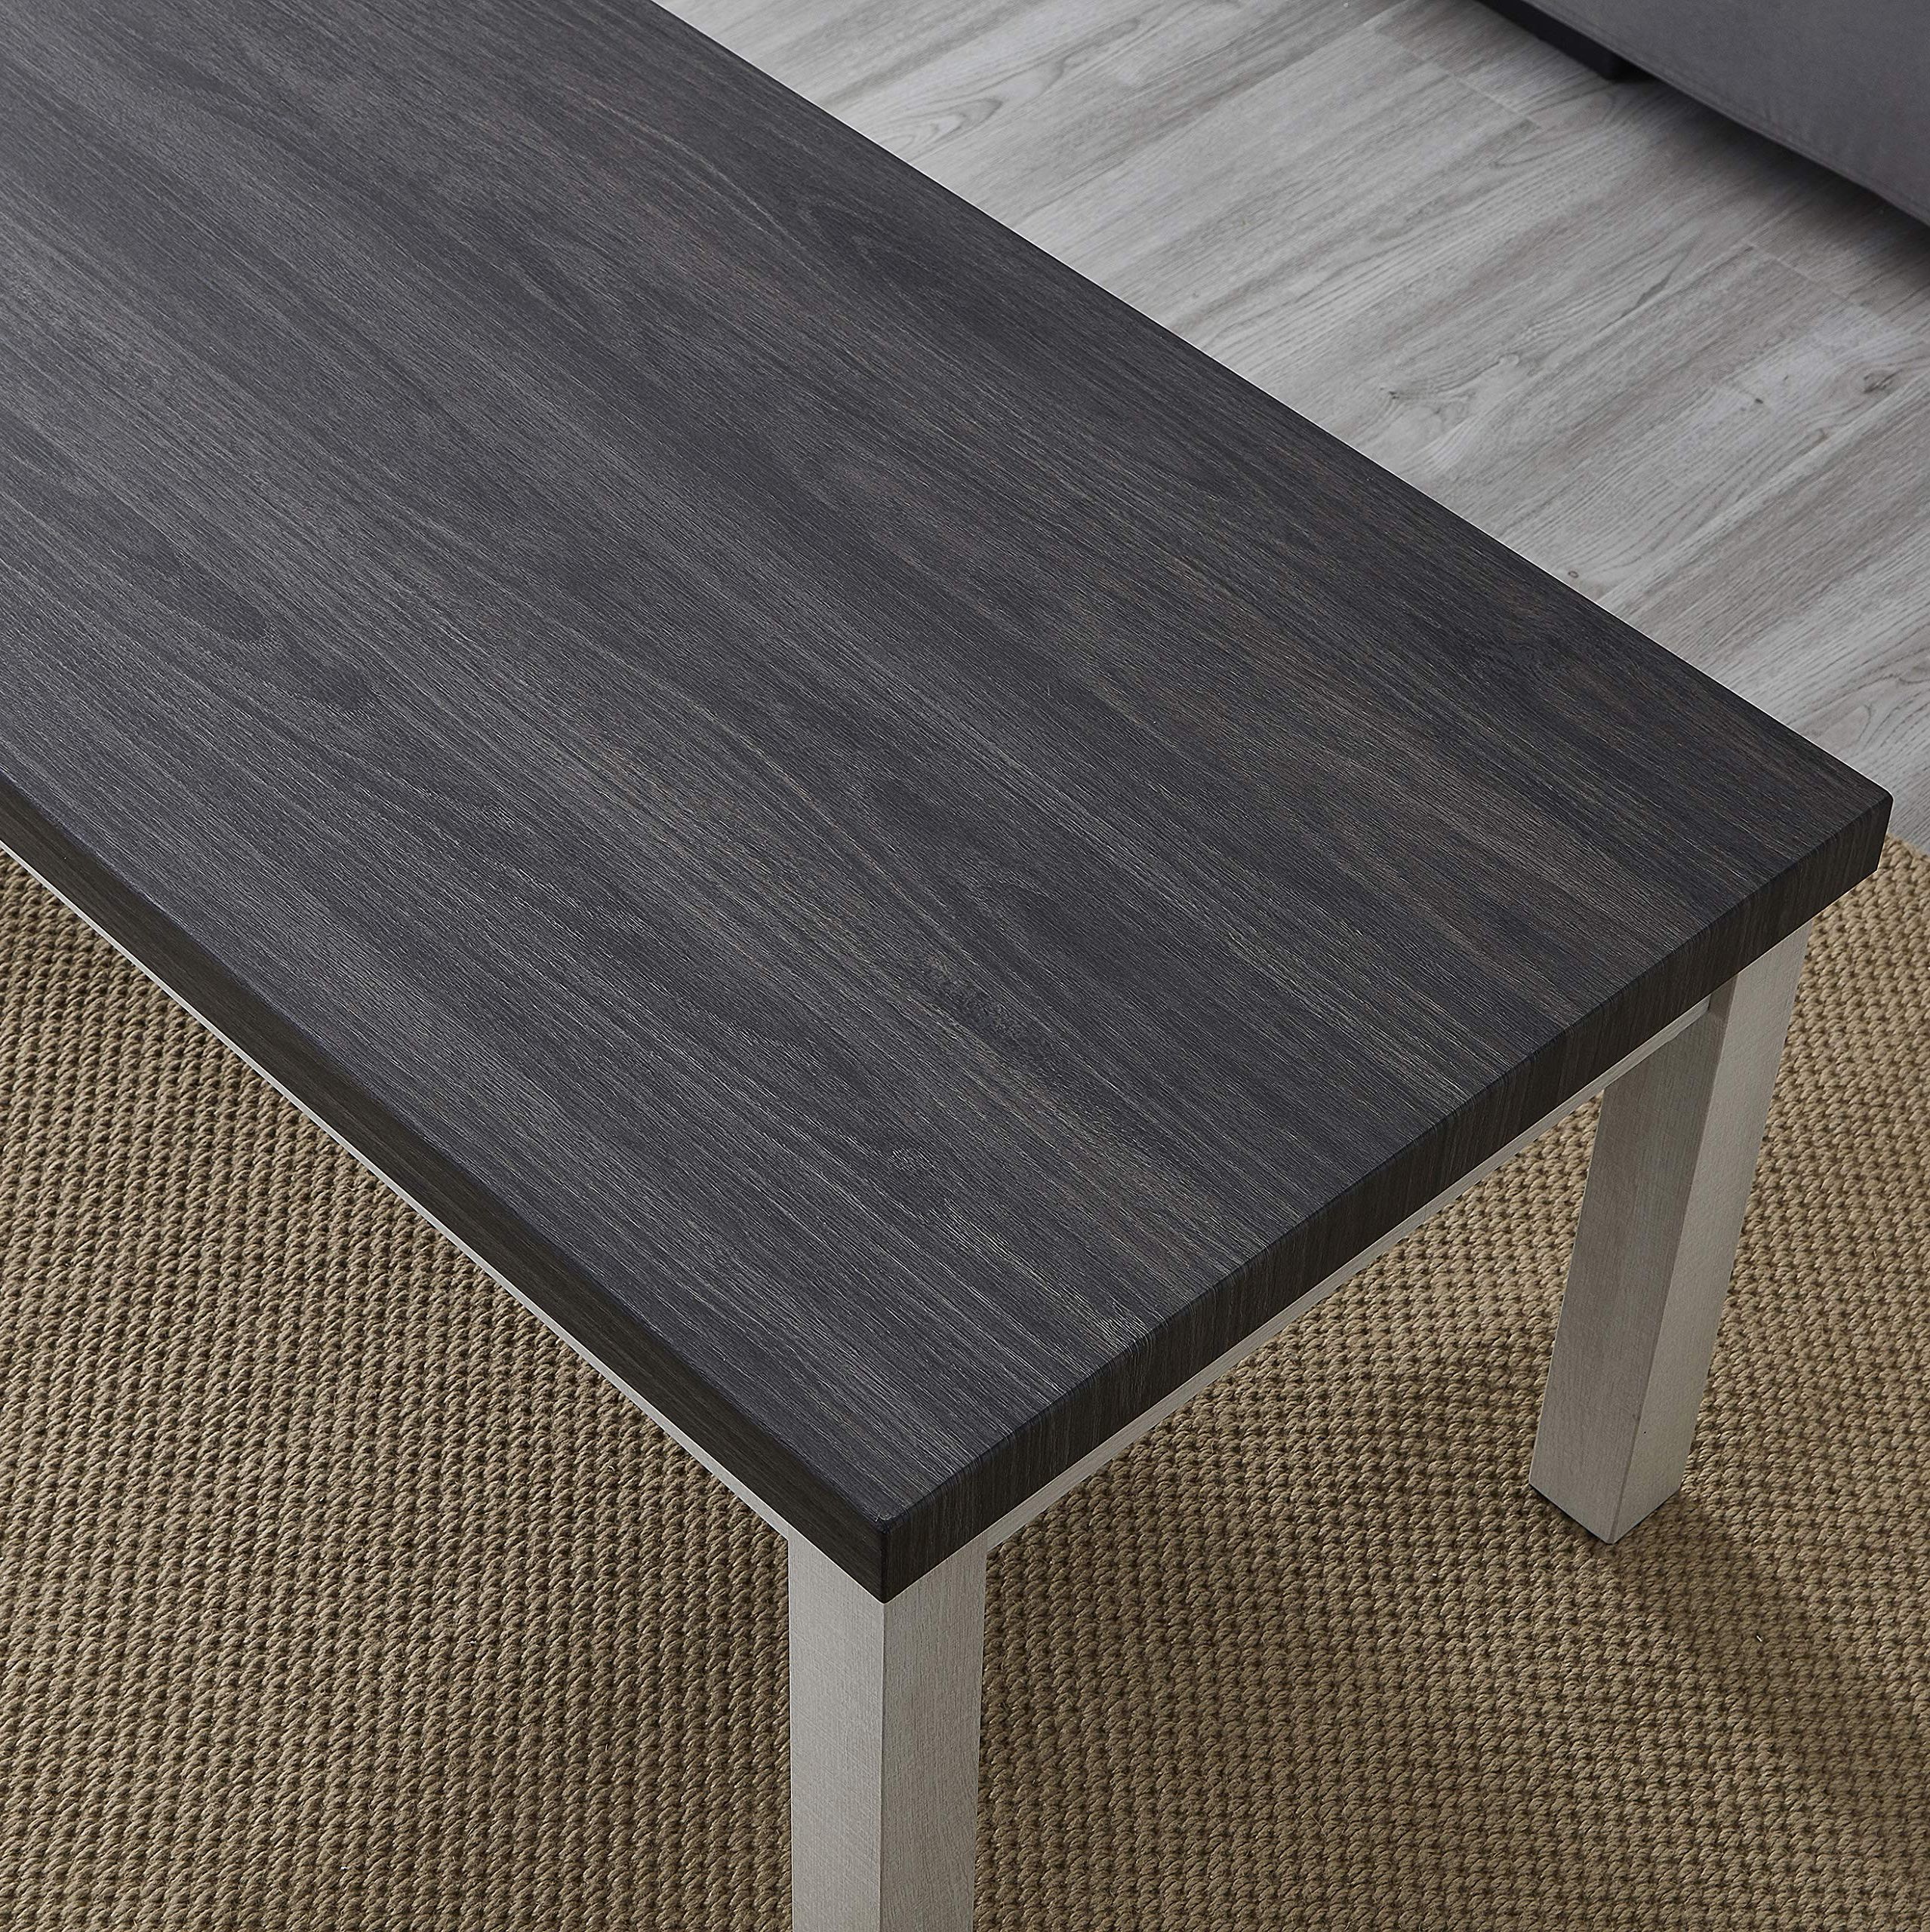 Pemberly Row Replicated Wood Coffee Tables Throughout Recent Amazon: Roundhill Furniture Ronan Two Tone Wood Rectangle Coffee Table,  Gray : Home & Kitchen (View 8 of 10)